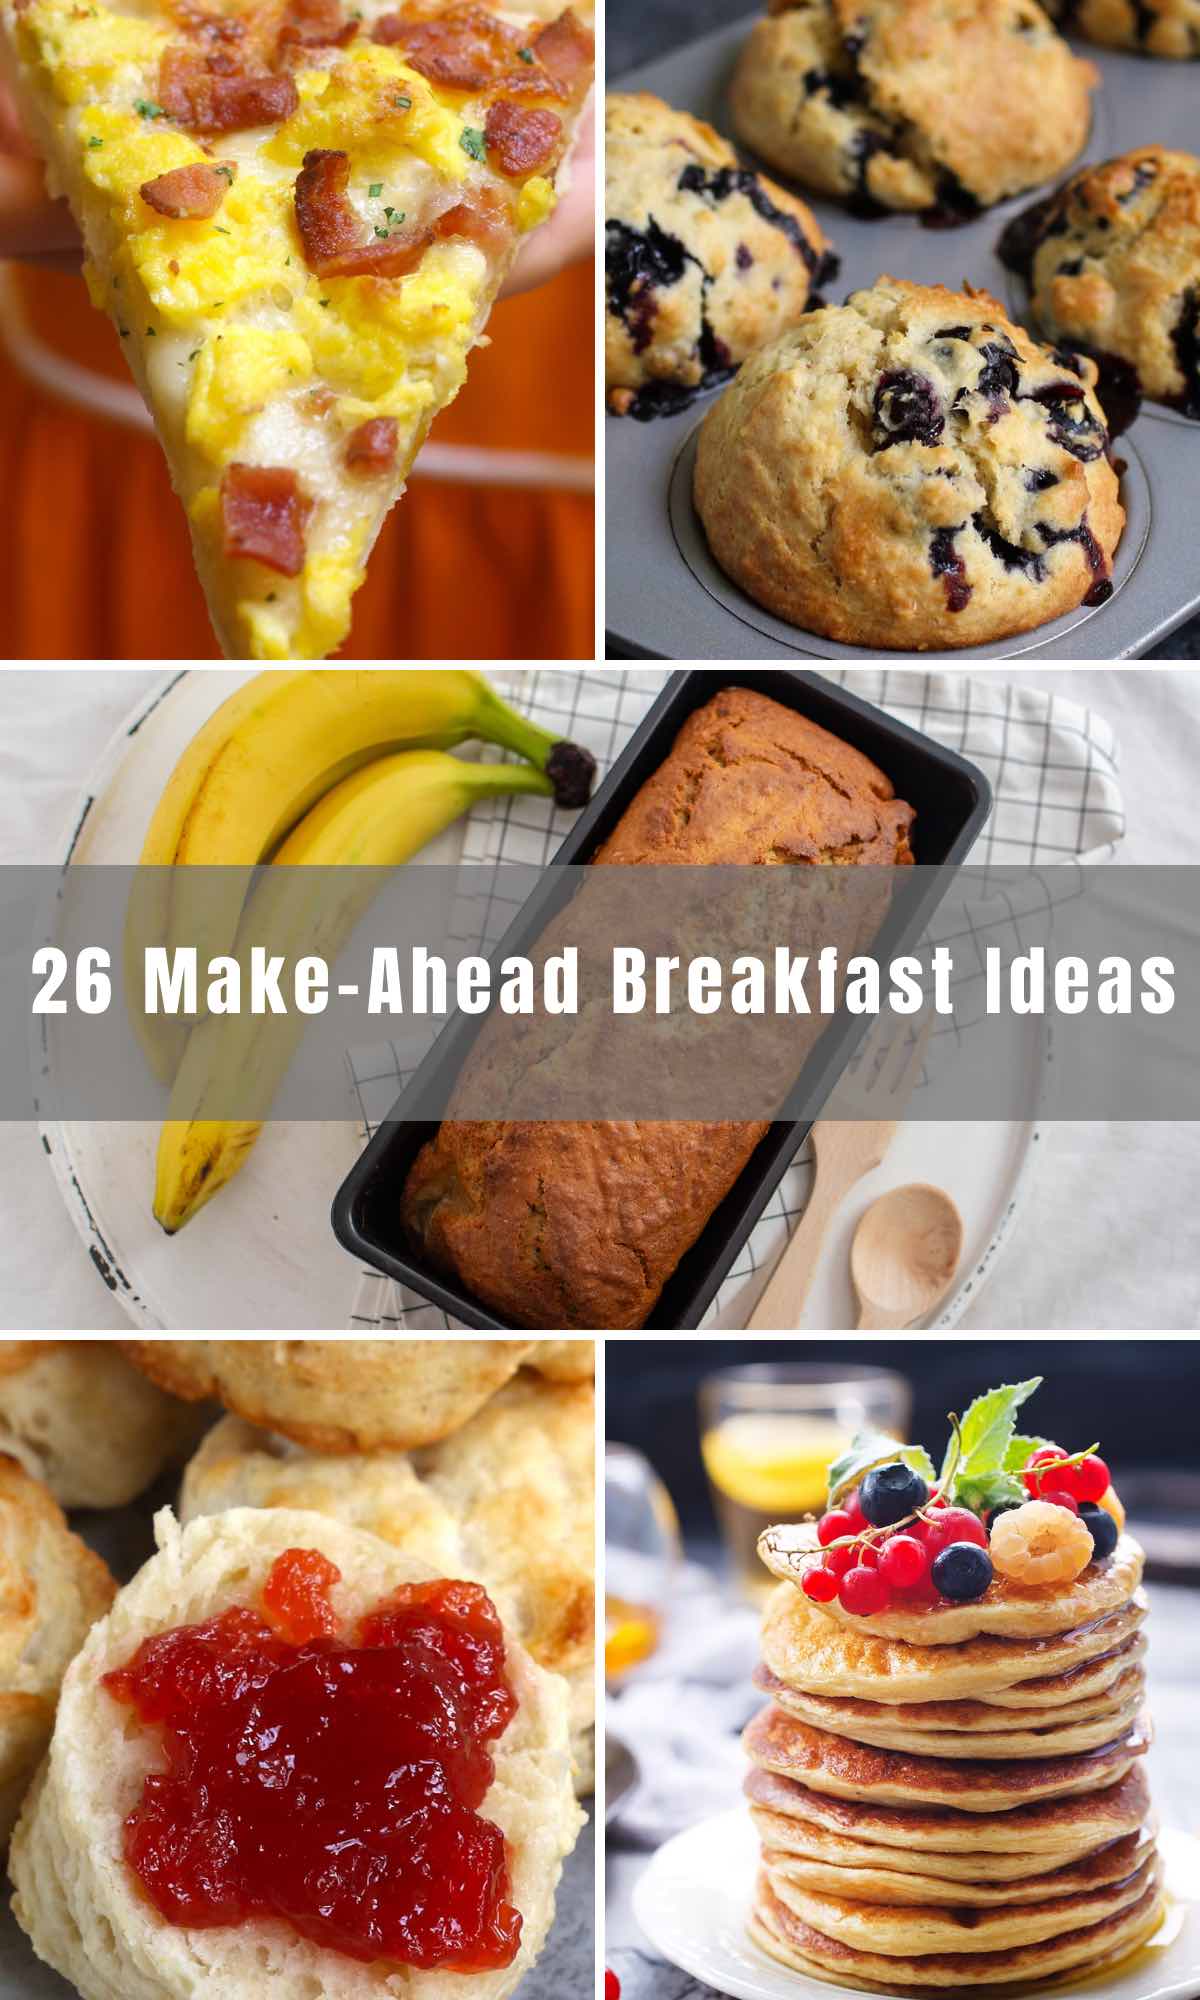 Mornings are busy, so we've rounded up 26 Make-Ahead Breakfast Recipes that will make your life much easier! These recipes are easy to make and can be prepared in advance - you'll start your day filled with energy.